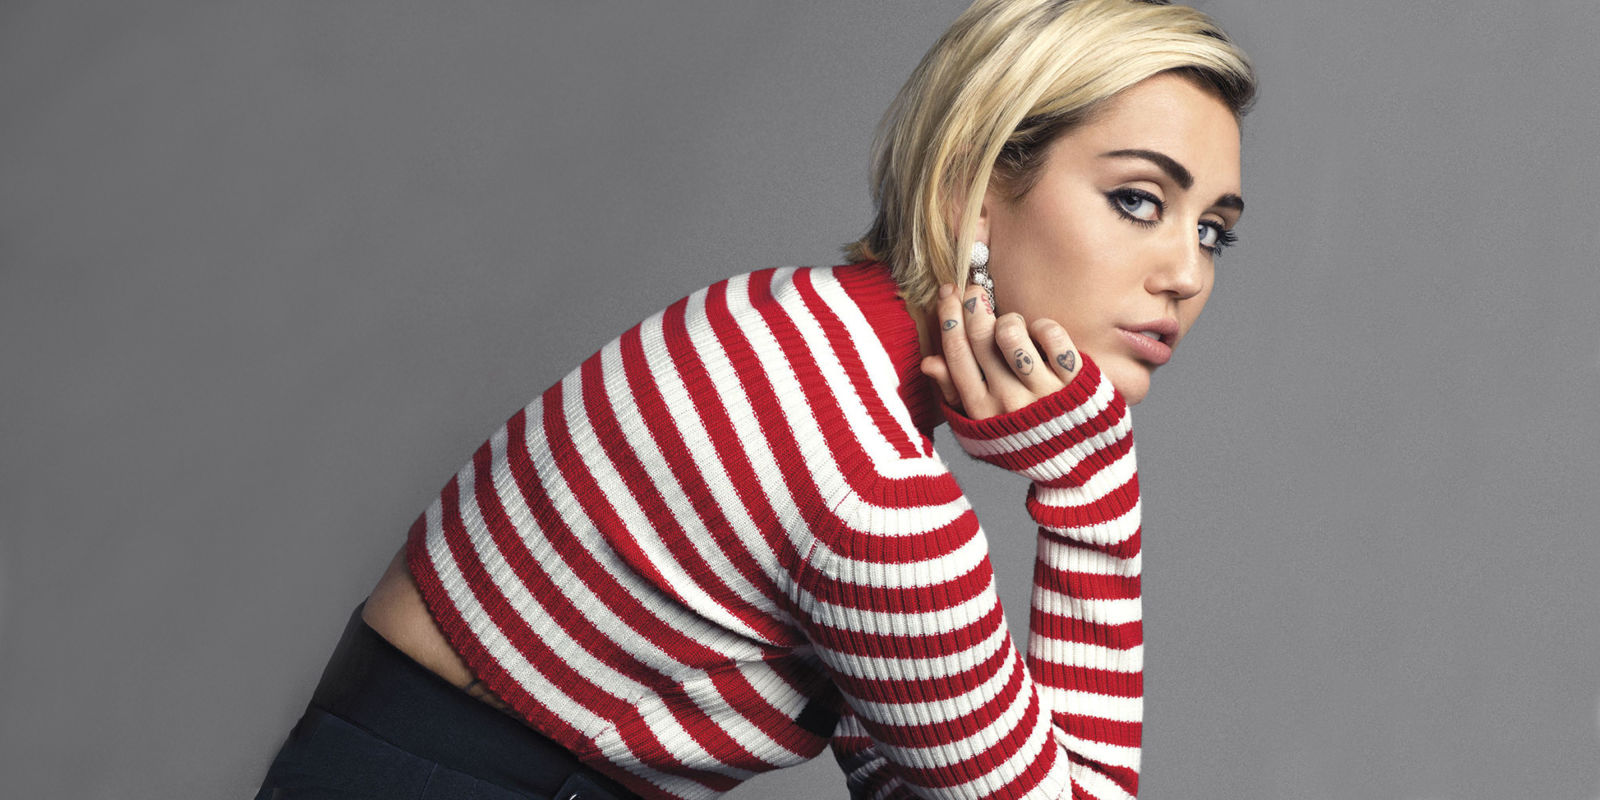 Miley Cyrus is Changing Her Style for Politics